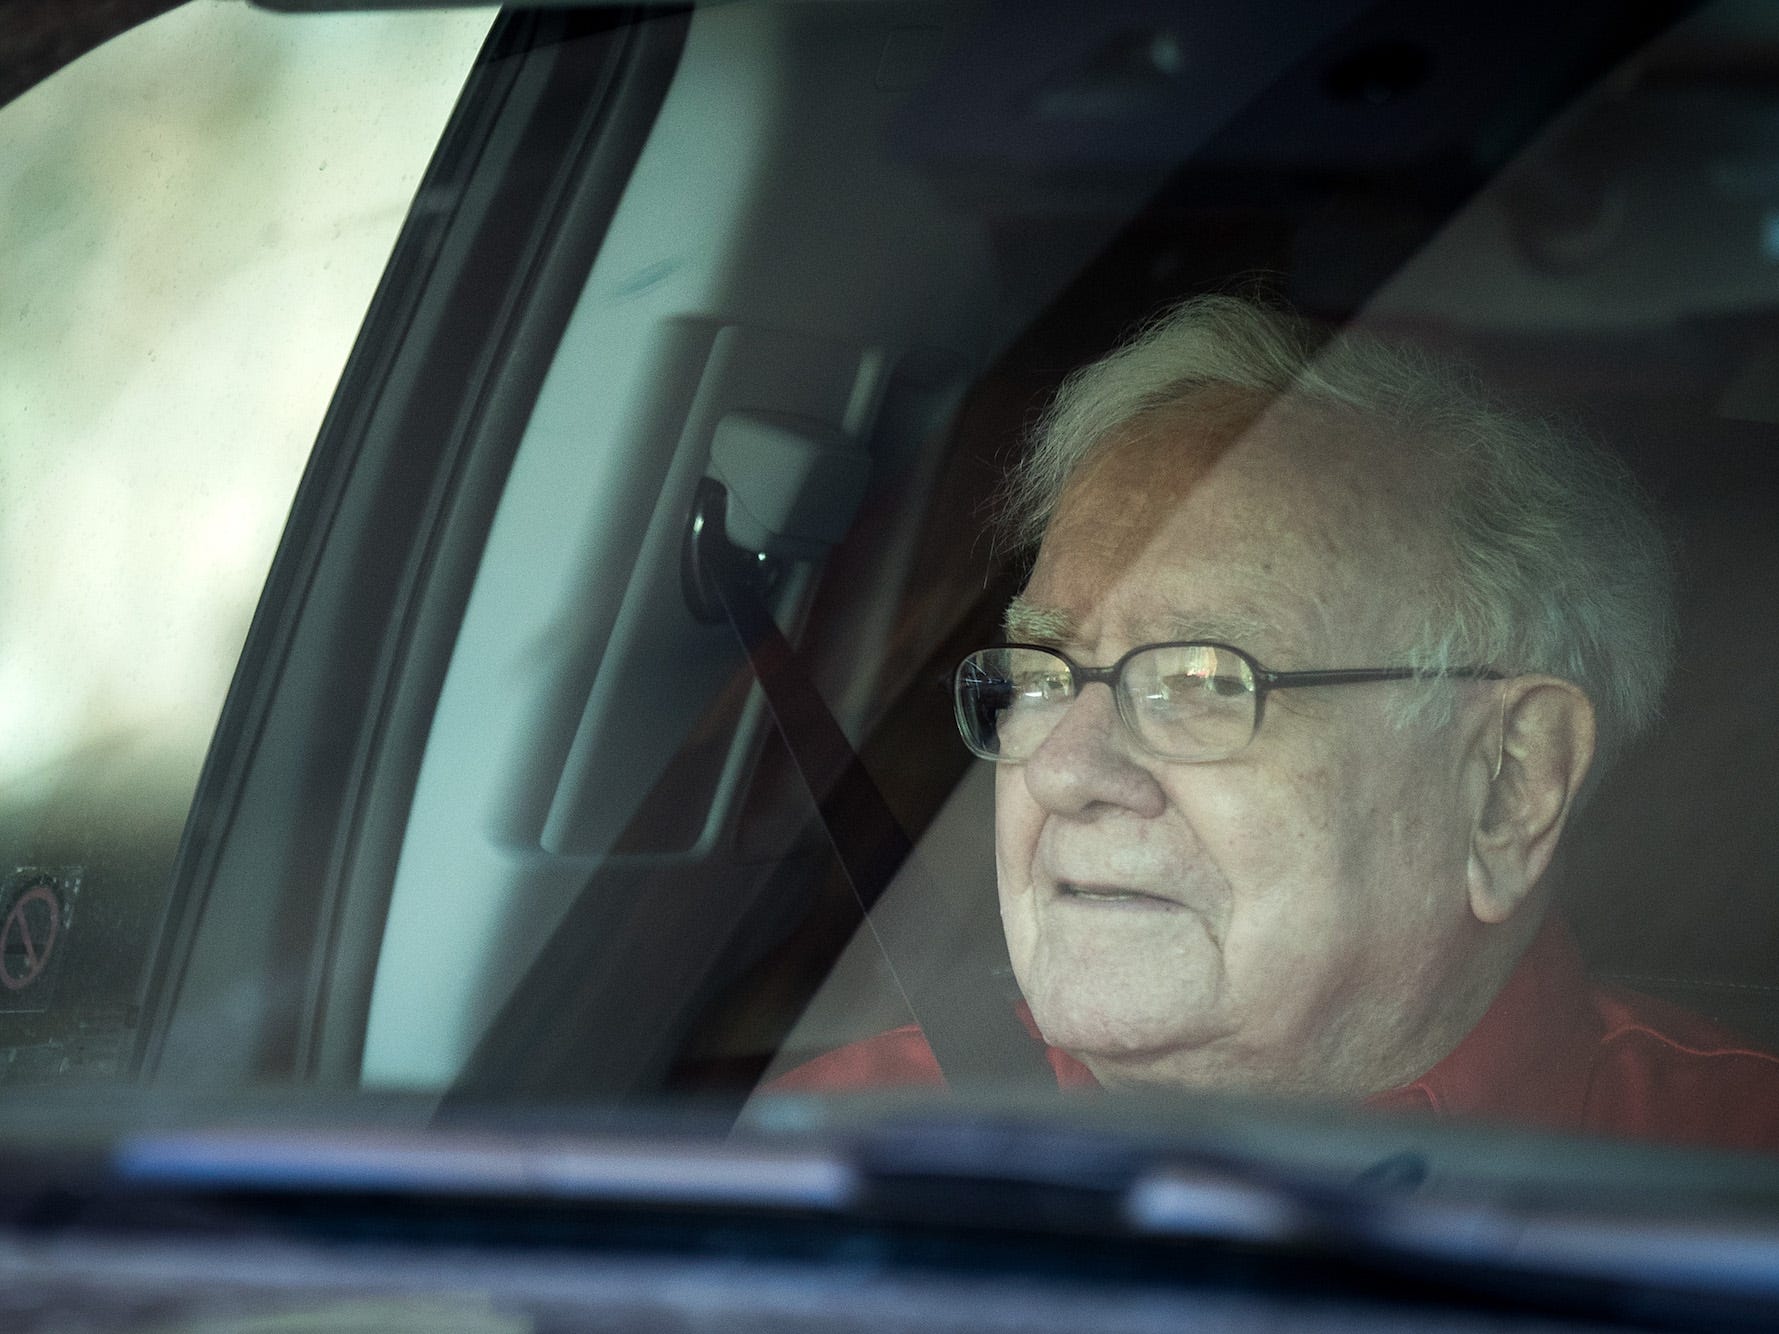 <p>Unlike many <a href="https://www.businessinsider.com/cars-billionaires-drive-warren-buffett-elon-musk-mark-zuckerberg-2019-7">other ultra-wealthy individuals</a>, Buffett has long driven a fairly modest set of wheels. He previously drove a 2001 Lincoln Town Car with a license plate that read <a href="https://www.wsj.com/articles/SB113175788303495486" rel="noopener">"THRIFTY"</a> for about a decade, before auctioning it off for charity and replacing it with a 2006 Cadillac DTS. In 2014, he replaced the DTS with a Cadillac XTS, according to <a href="https://www.forbes.com/sites/joannmuller/2014/07/15/warren-buffett-shares-the-inside-scoop-he-bought-a-cadillac-not-a-subaru/?sh=43c948036824" rel="noopener">Forbes</a>.</p><p>"The truth is, I only drive about 3,500 miles a year so I will buy a new car very infrequently," Buffett once told Forbes.</p>